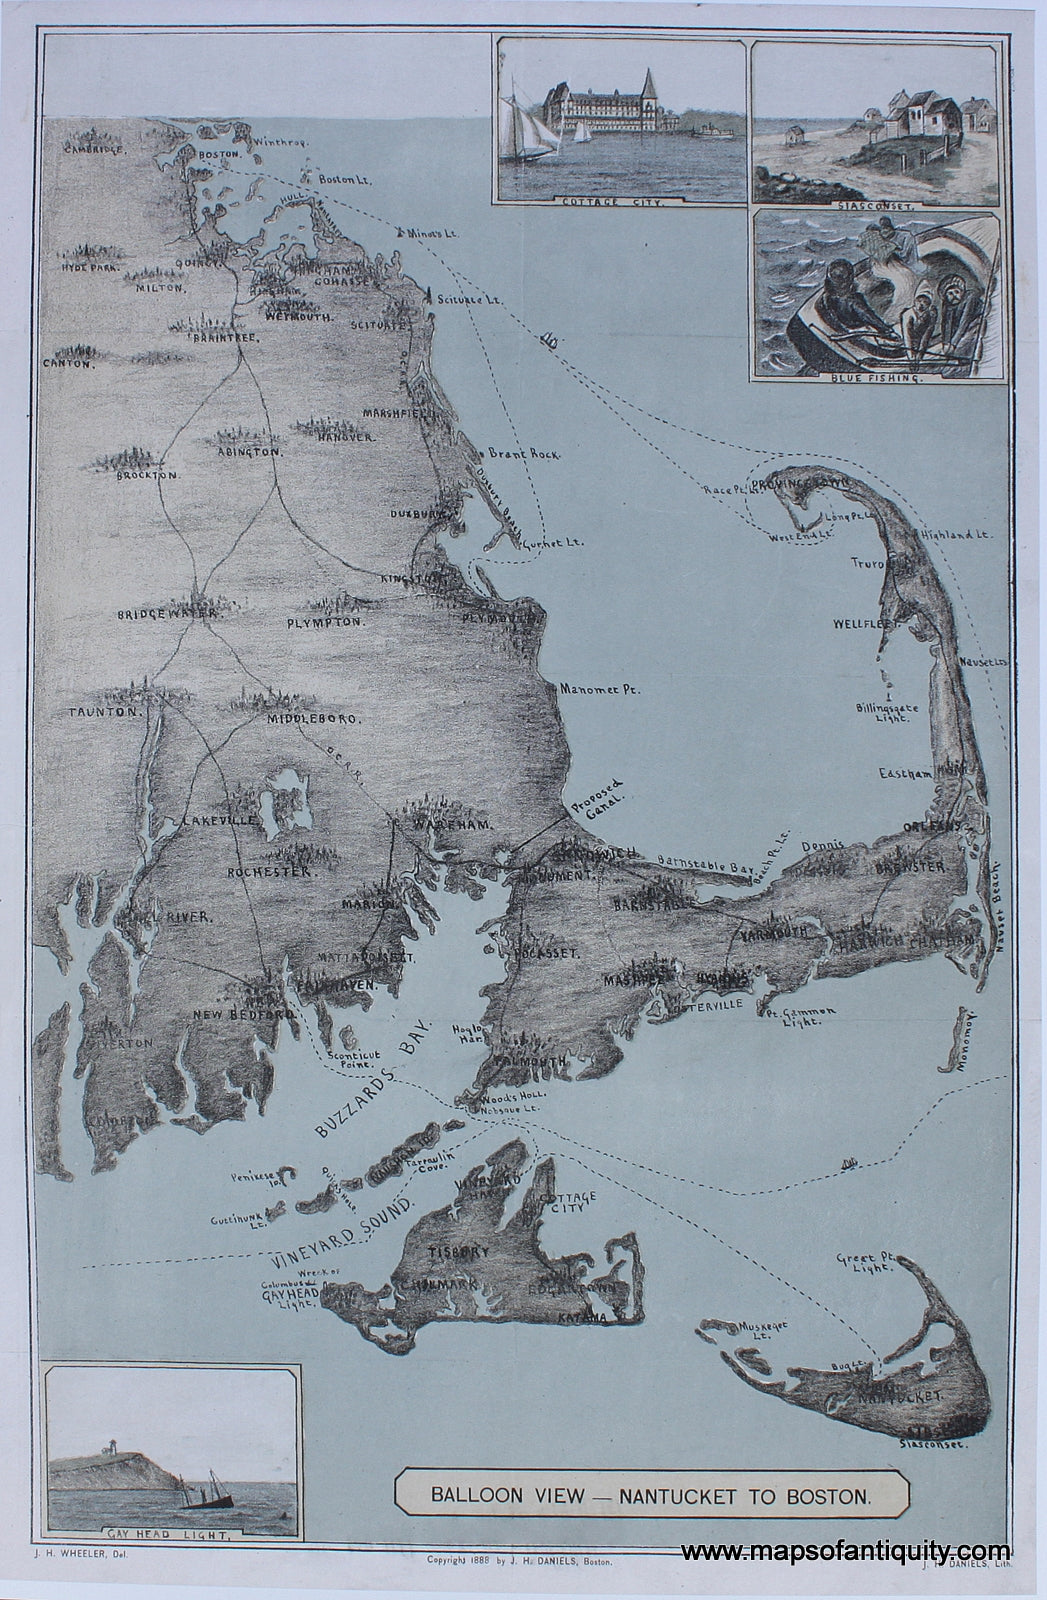 Reproduction-Balloon-View---Nantucket-to-Boston---Reproduction---New-England-Cape-Cod-and-Islands-Reproduction-Wheeler-Maps-Of-Antiquity